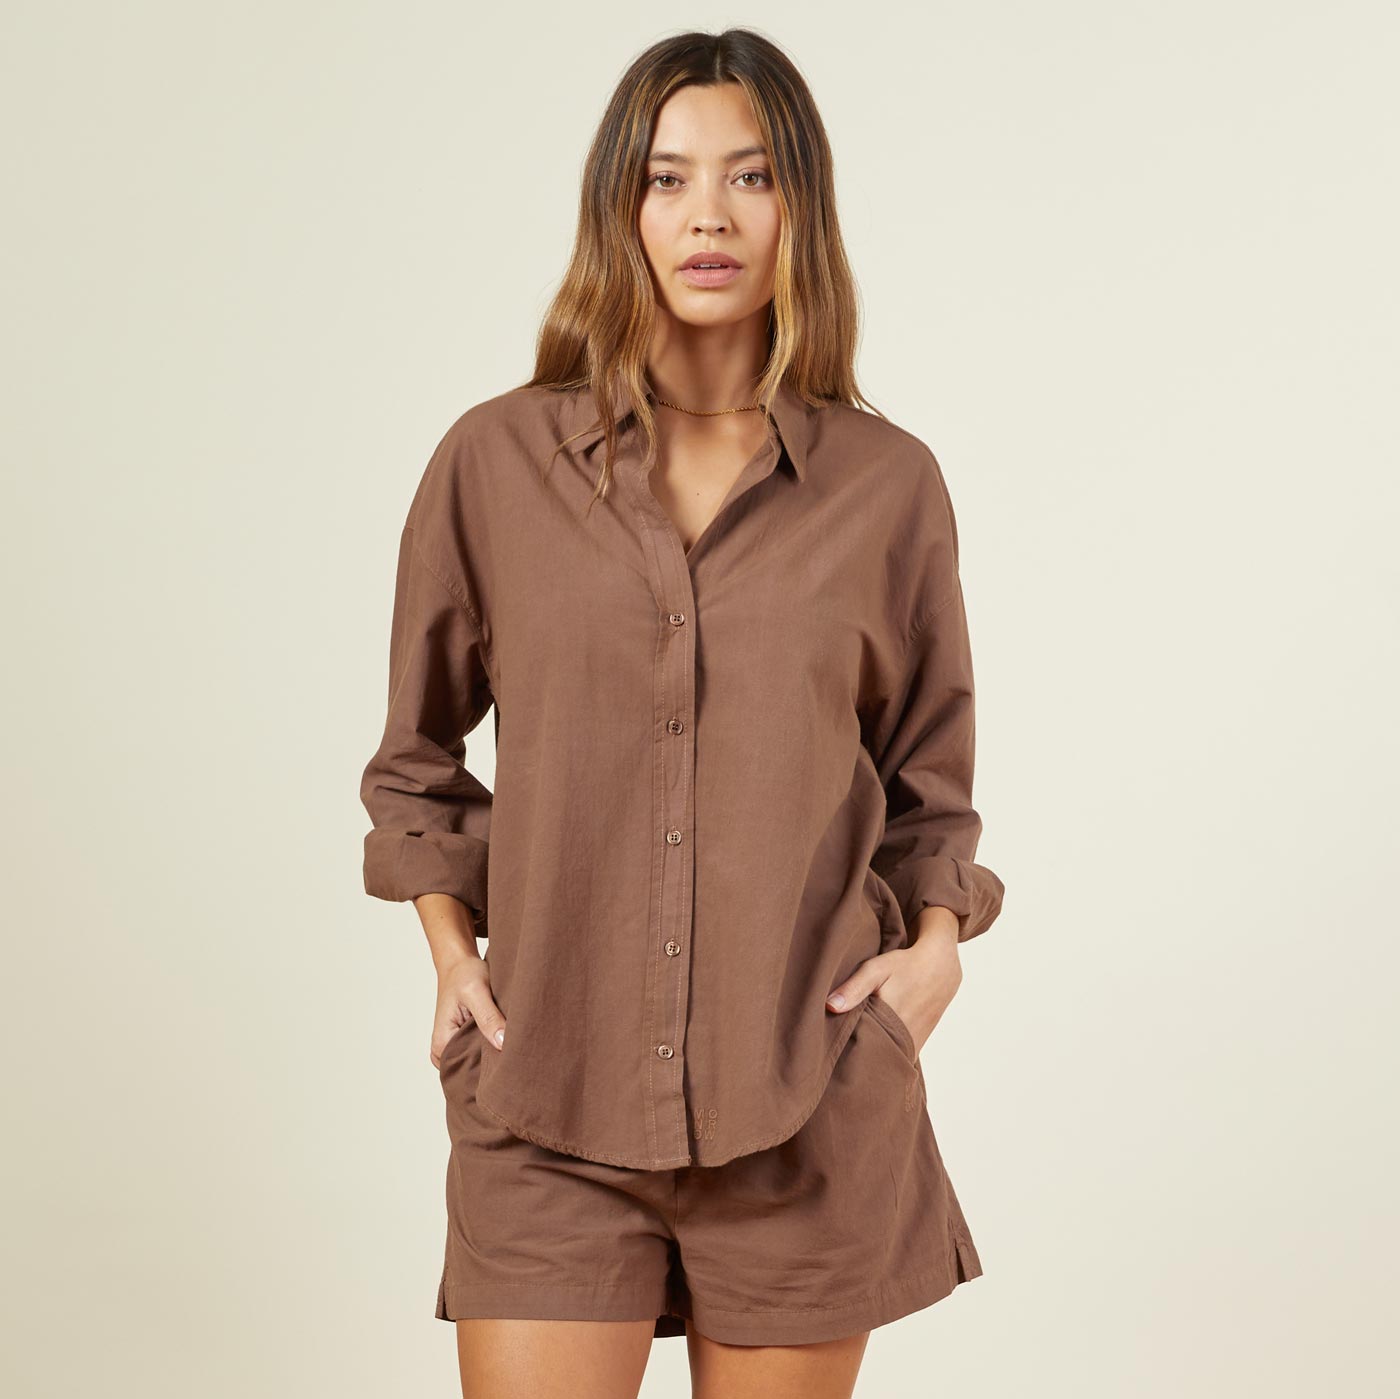 Front view of model wearing the poplin shirt in dusty cocoa.